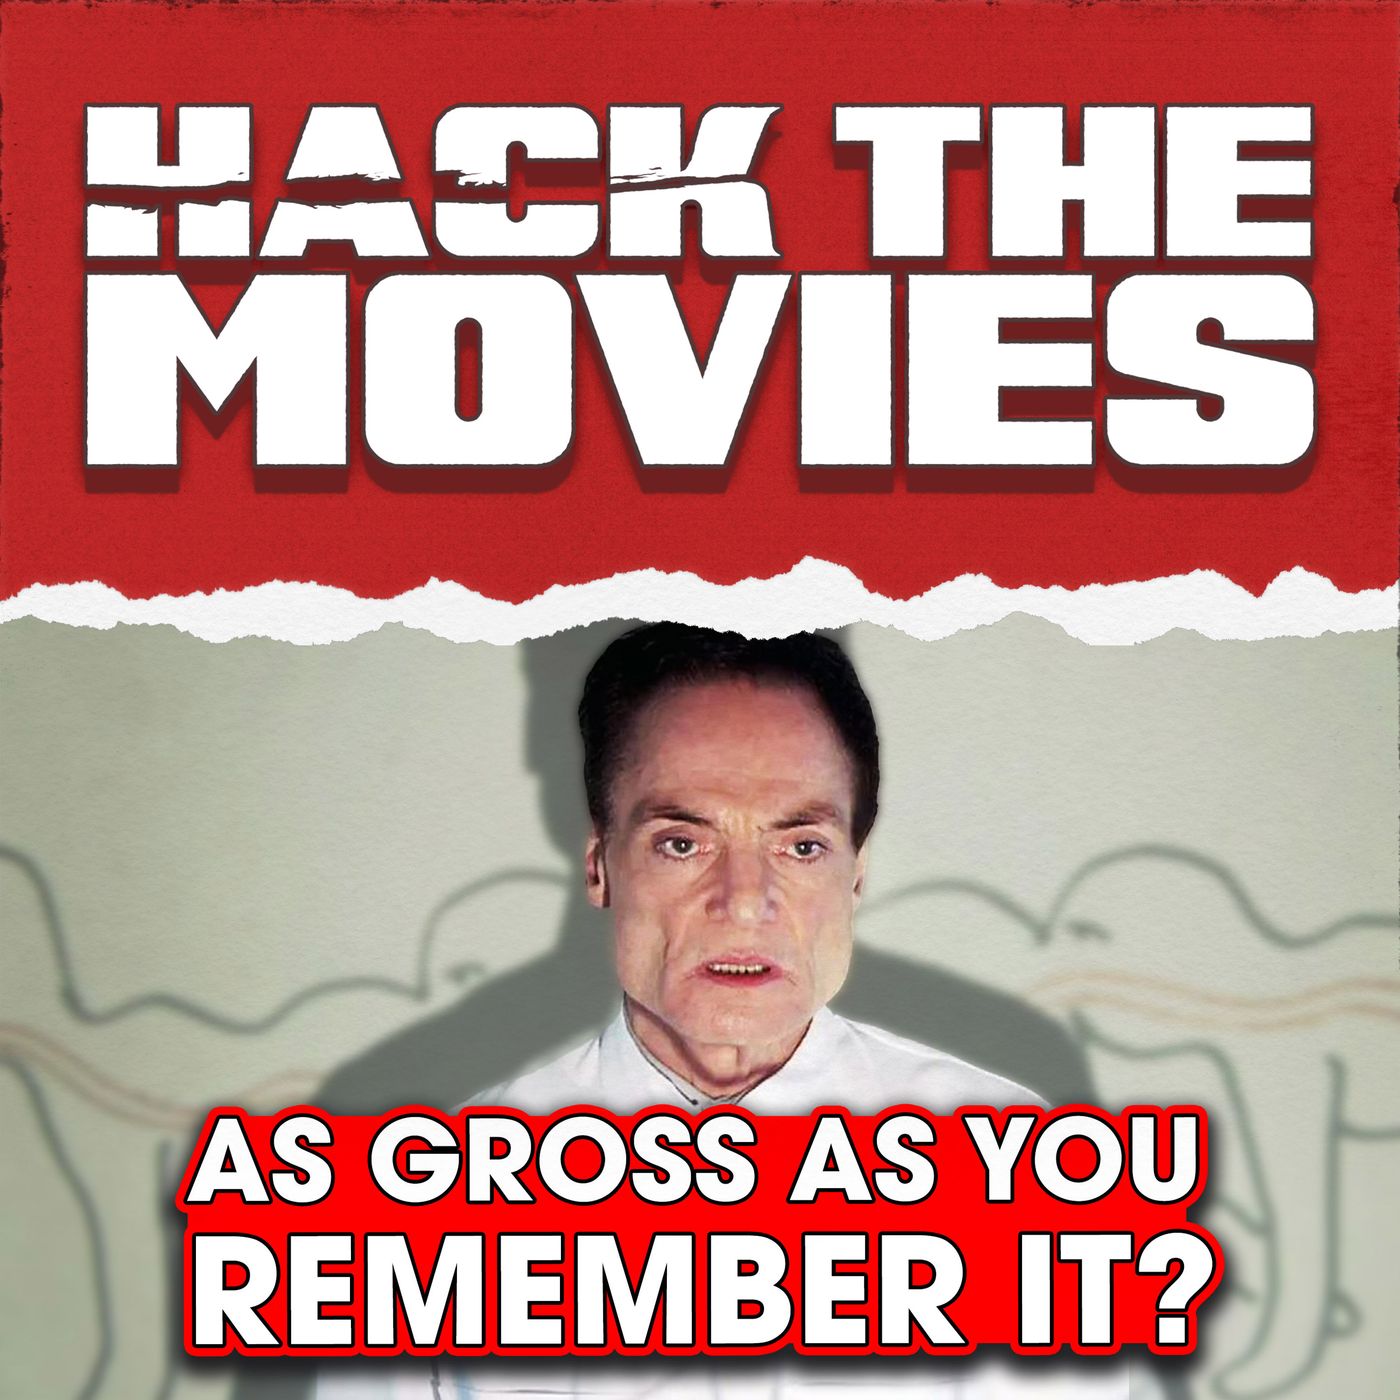 Is The Human Centipede As Gross As You Remember It? - Hack The Movies (#273)